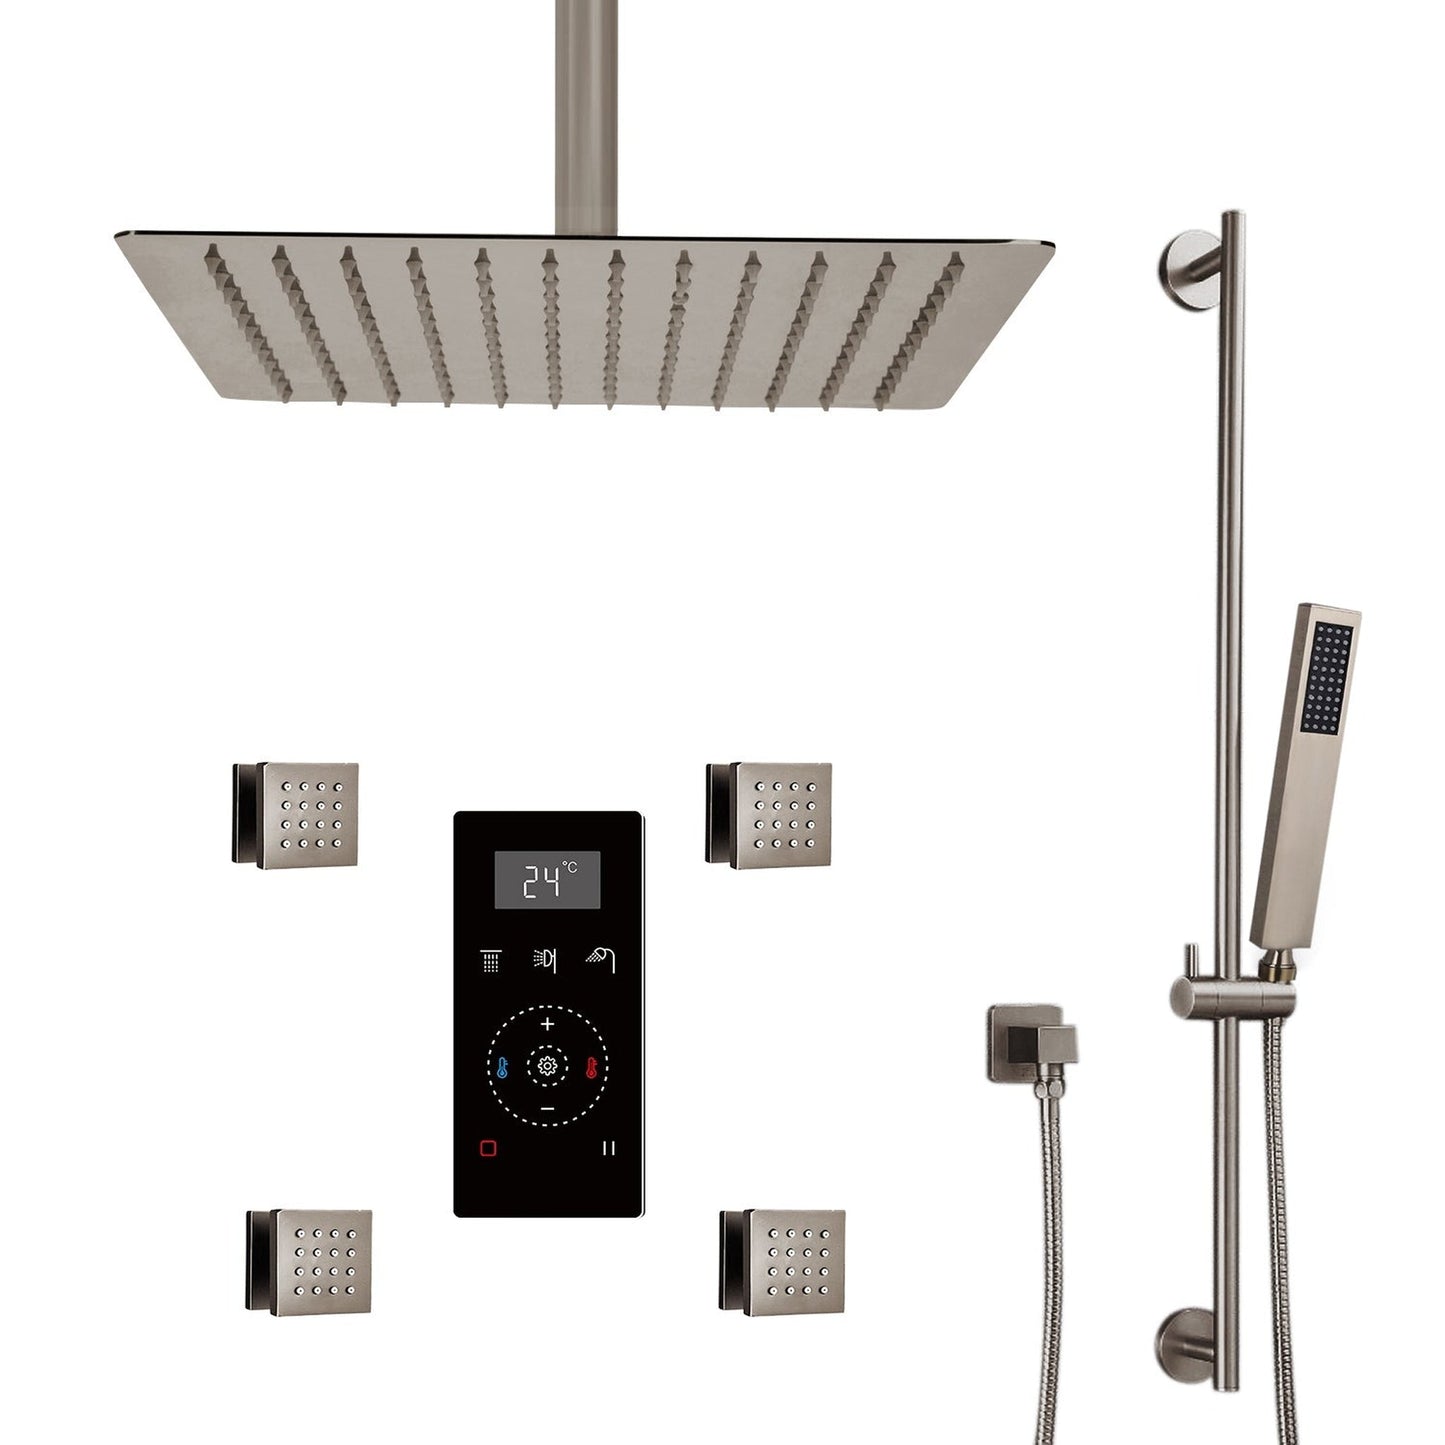 Fontana 10" Brushed Nickel Ceiling Mounted Rainfall Digital Thermostat Mixer Shower System With 4-Jet Body Spray, Hand Shower and Water Powered LED Lights